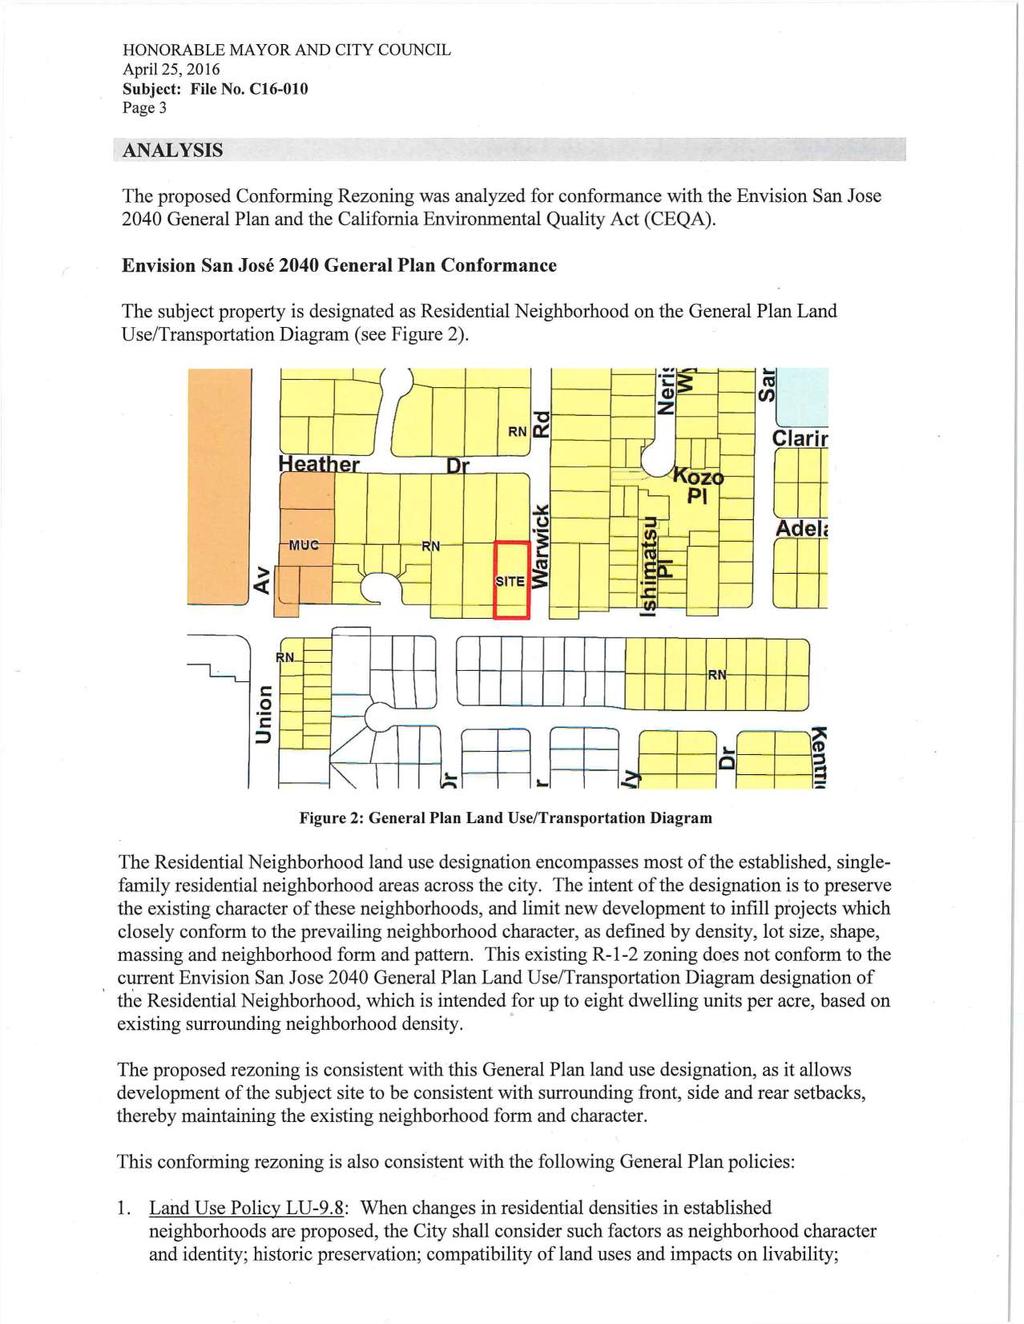 April 25, 2016 Page 3 ANALYSIS The proposed Conforming Rezoning was analyzed for conformance with the Envision San Jose 2040 General Plan and the California Environmental Quality Act (CEQA).